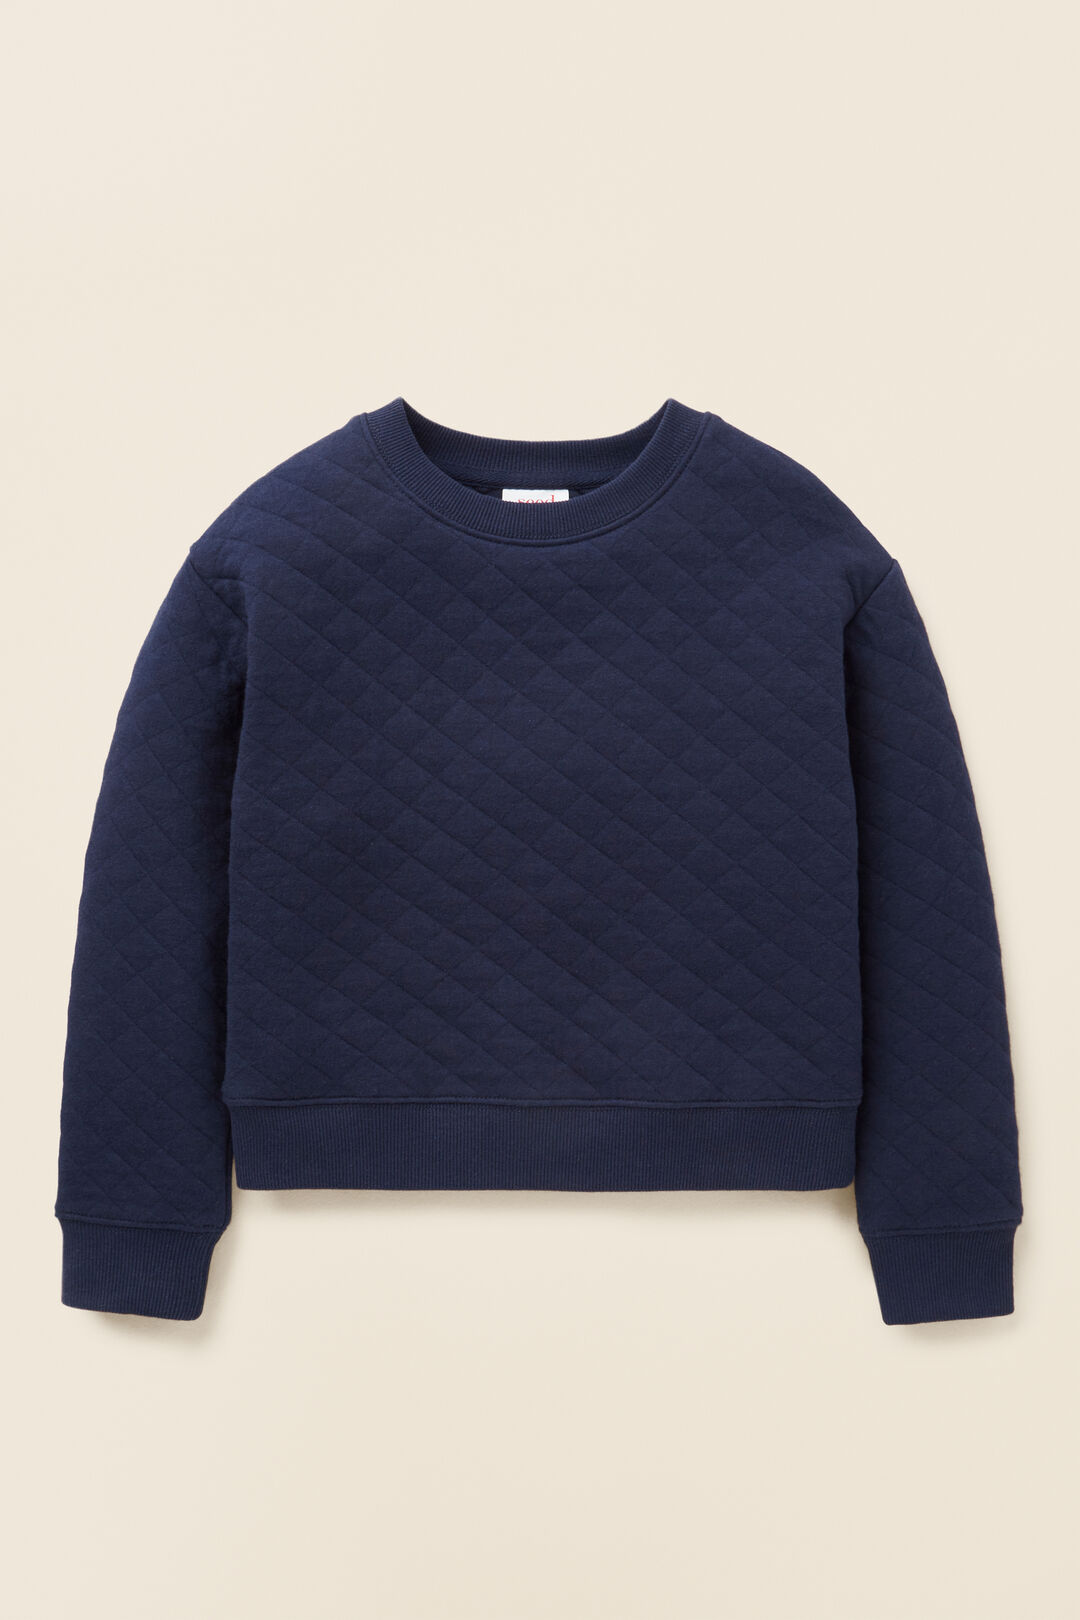 Quilted Sweater  Midnight  hi-res